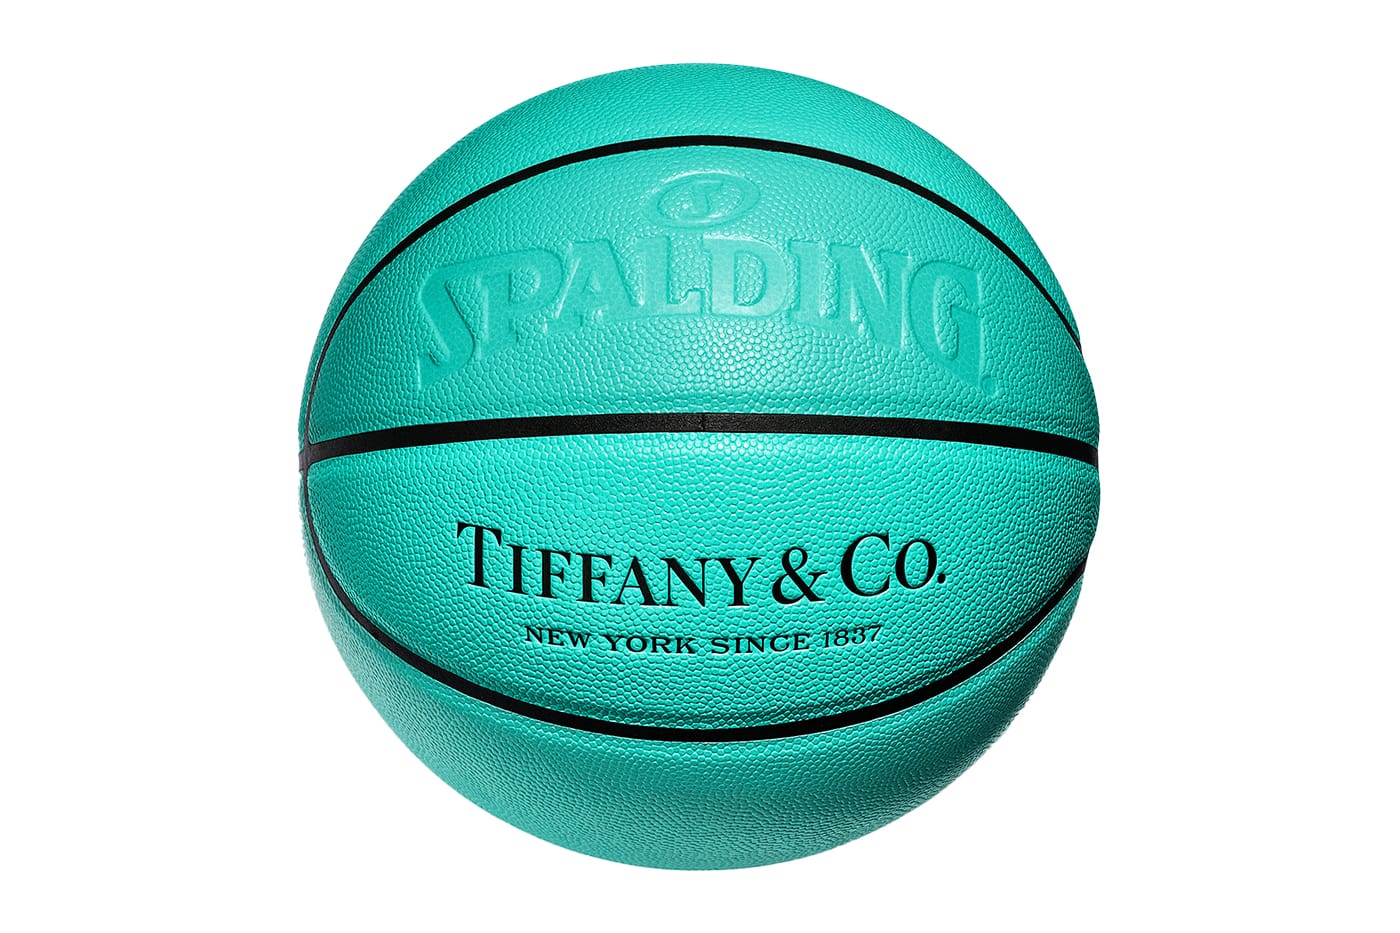 Tiffany & Co. x Mitchell & Ness/Spalding Release   Hypebeast